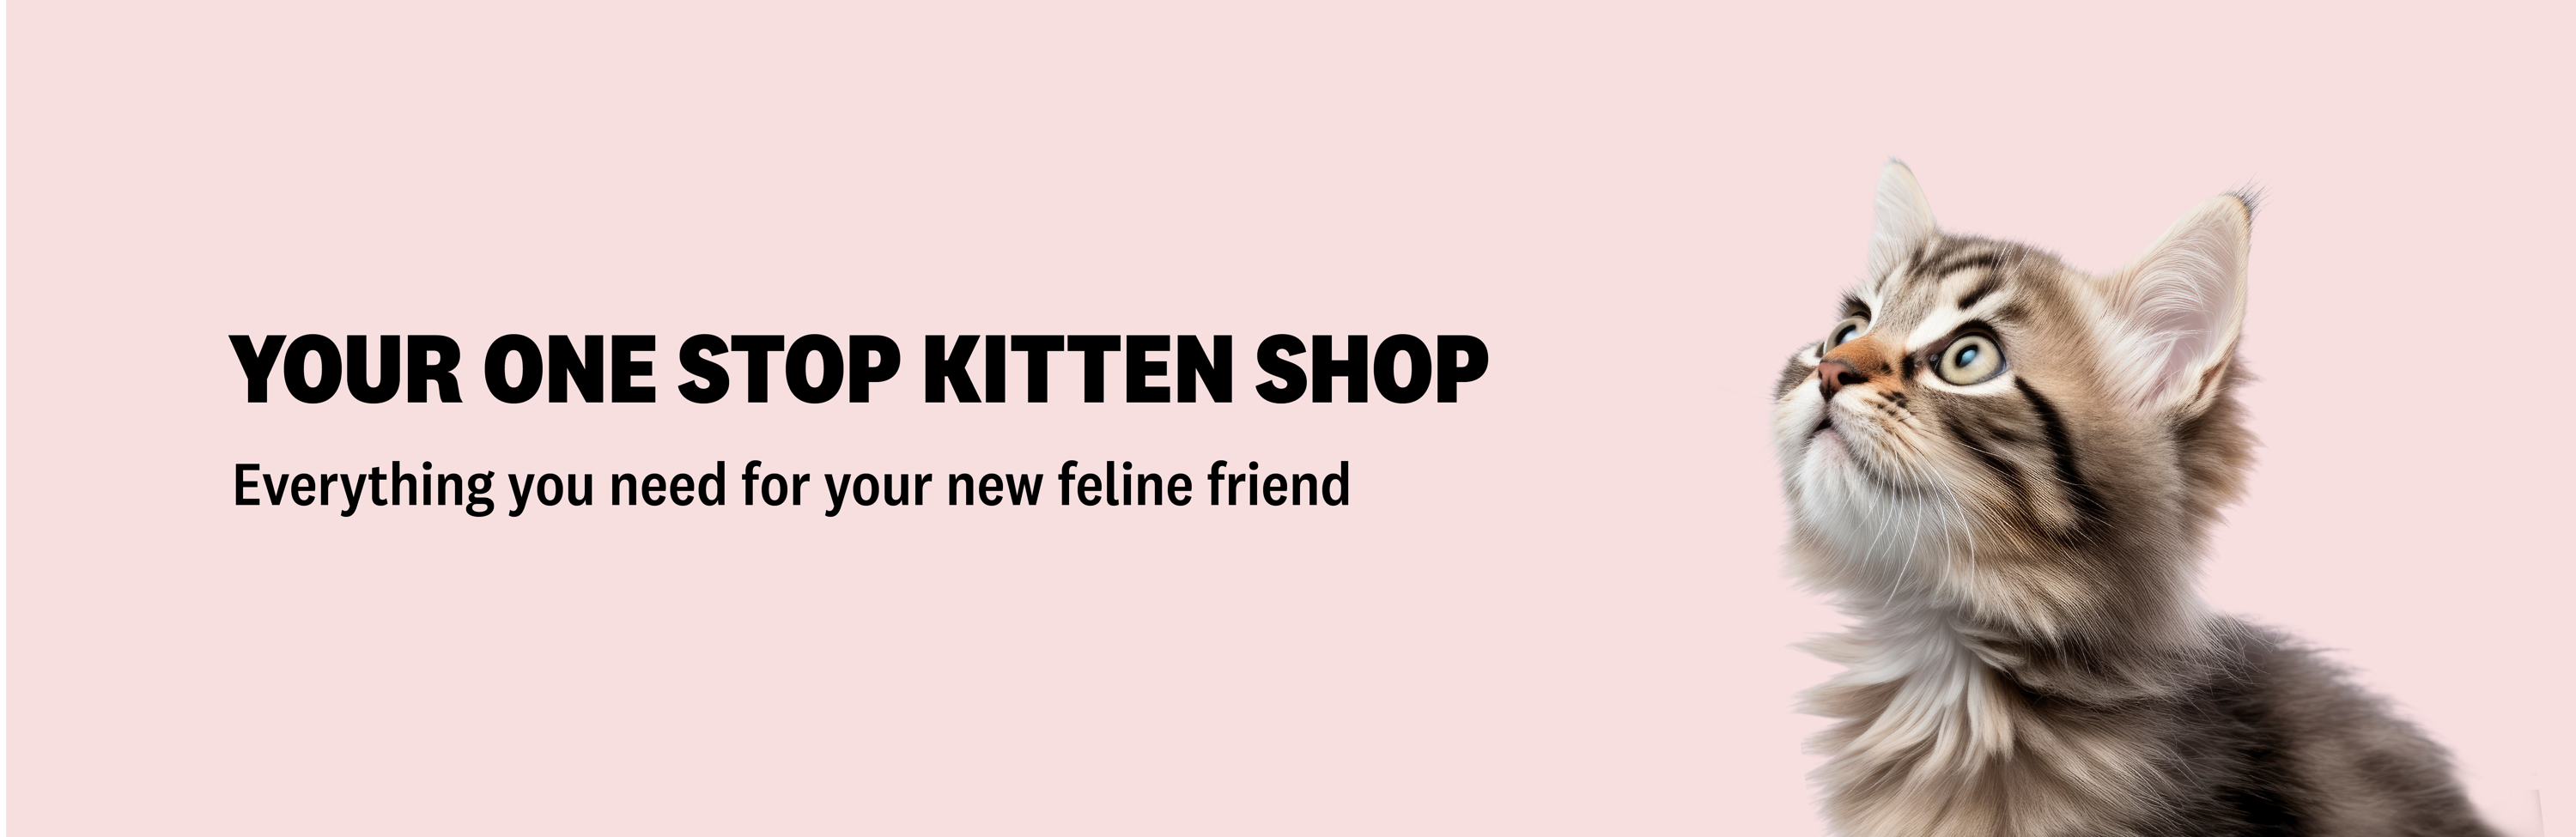 Your One Stop Kitten Shop